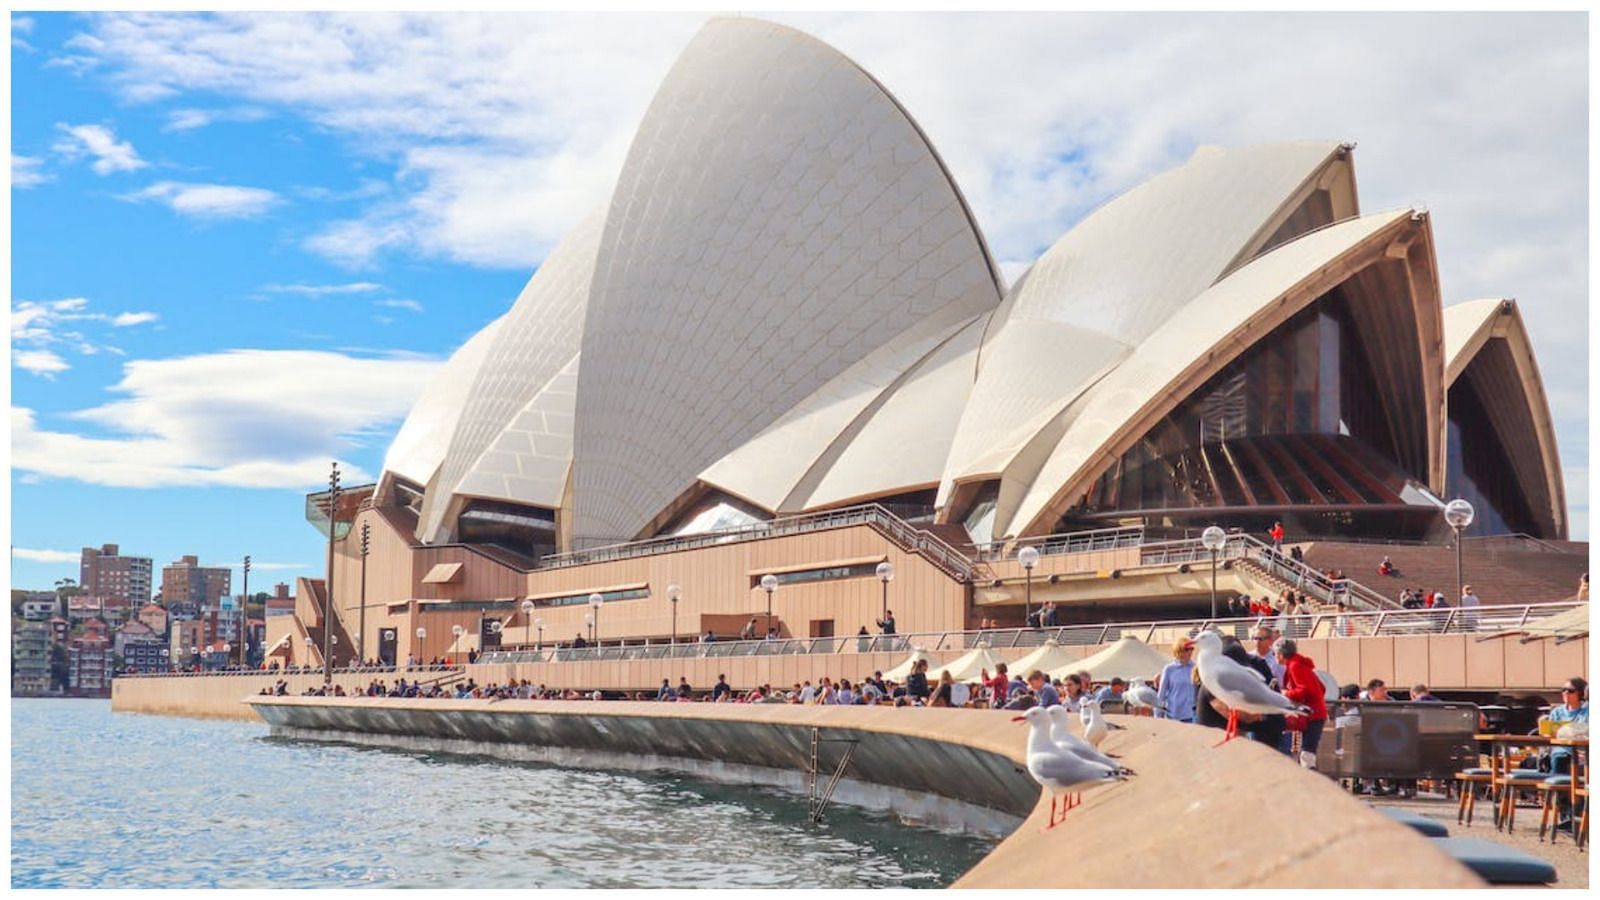 A recent shark attack near the Sydney Opera House left a woman severely injured (Image via Pexels)